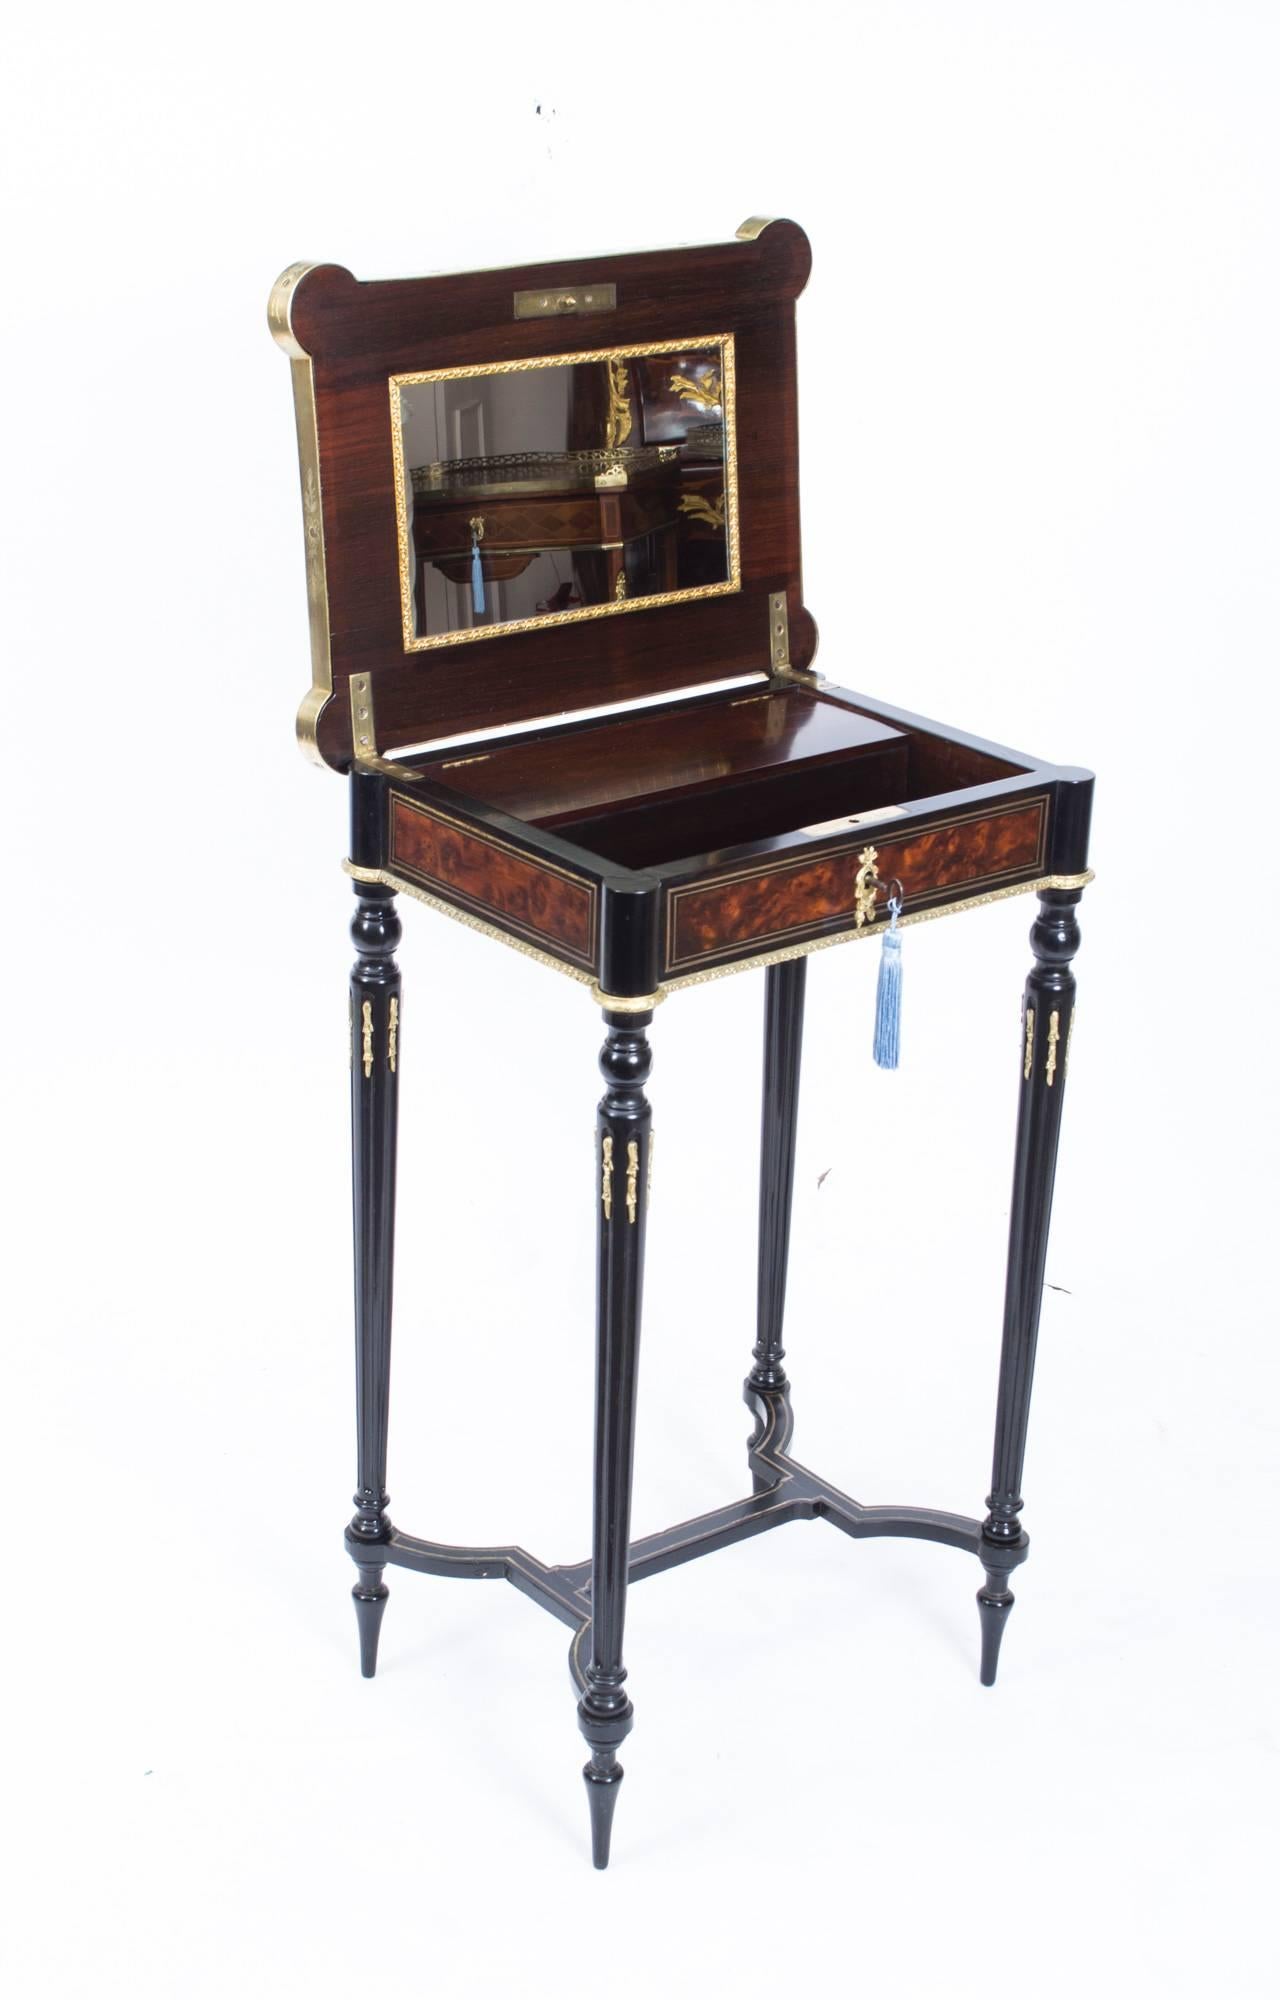 This is a beautiful antique French burr walnut and ebonized occasional work/dressing table, circa 1860 in date. The brass lock, complete with key, bears the inscription of the maker “Tahan Paris,” Alphonse Tahan was the master cabinet maker to